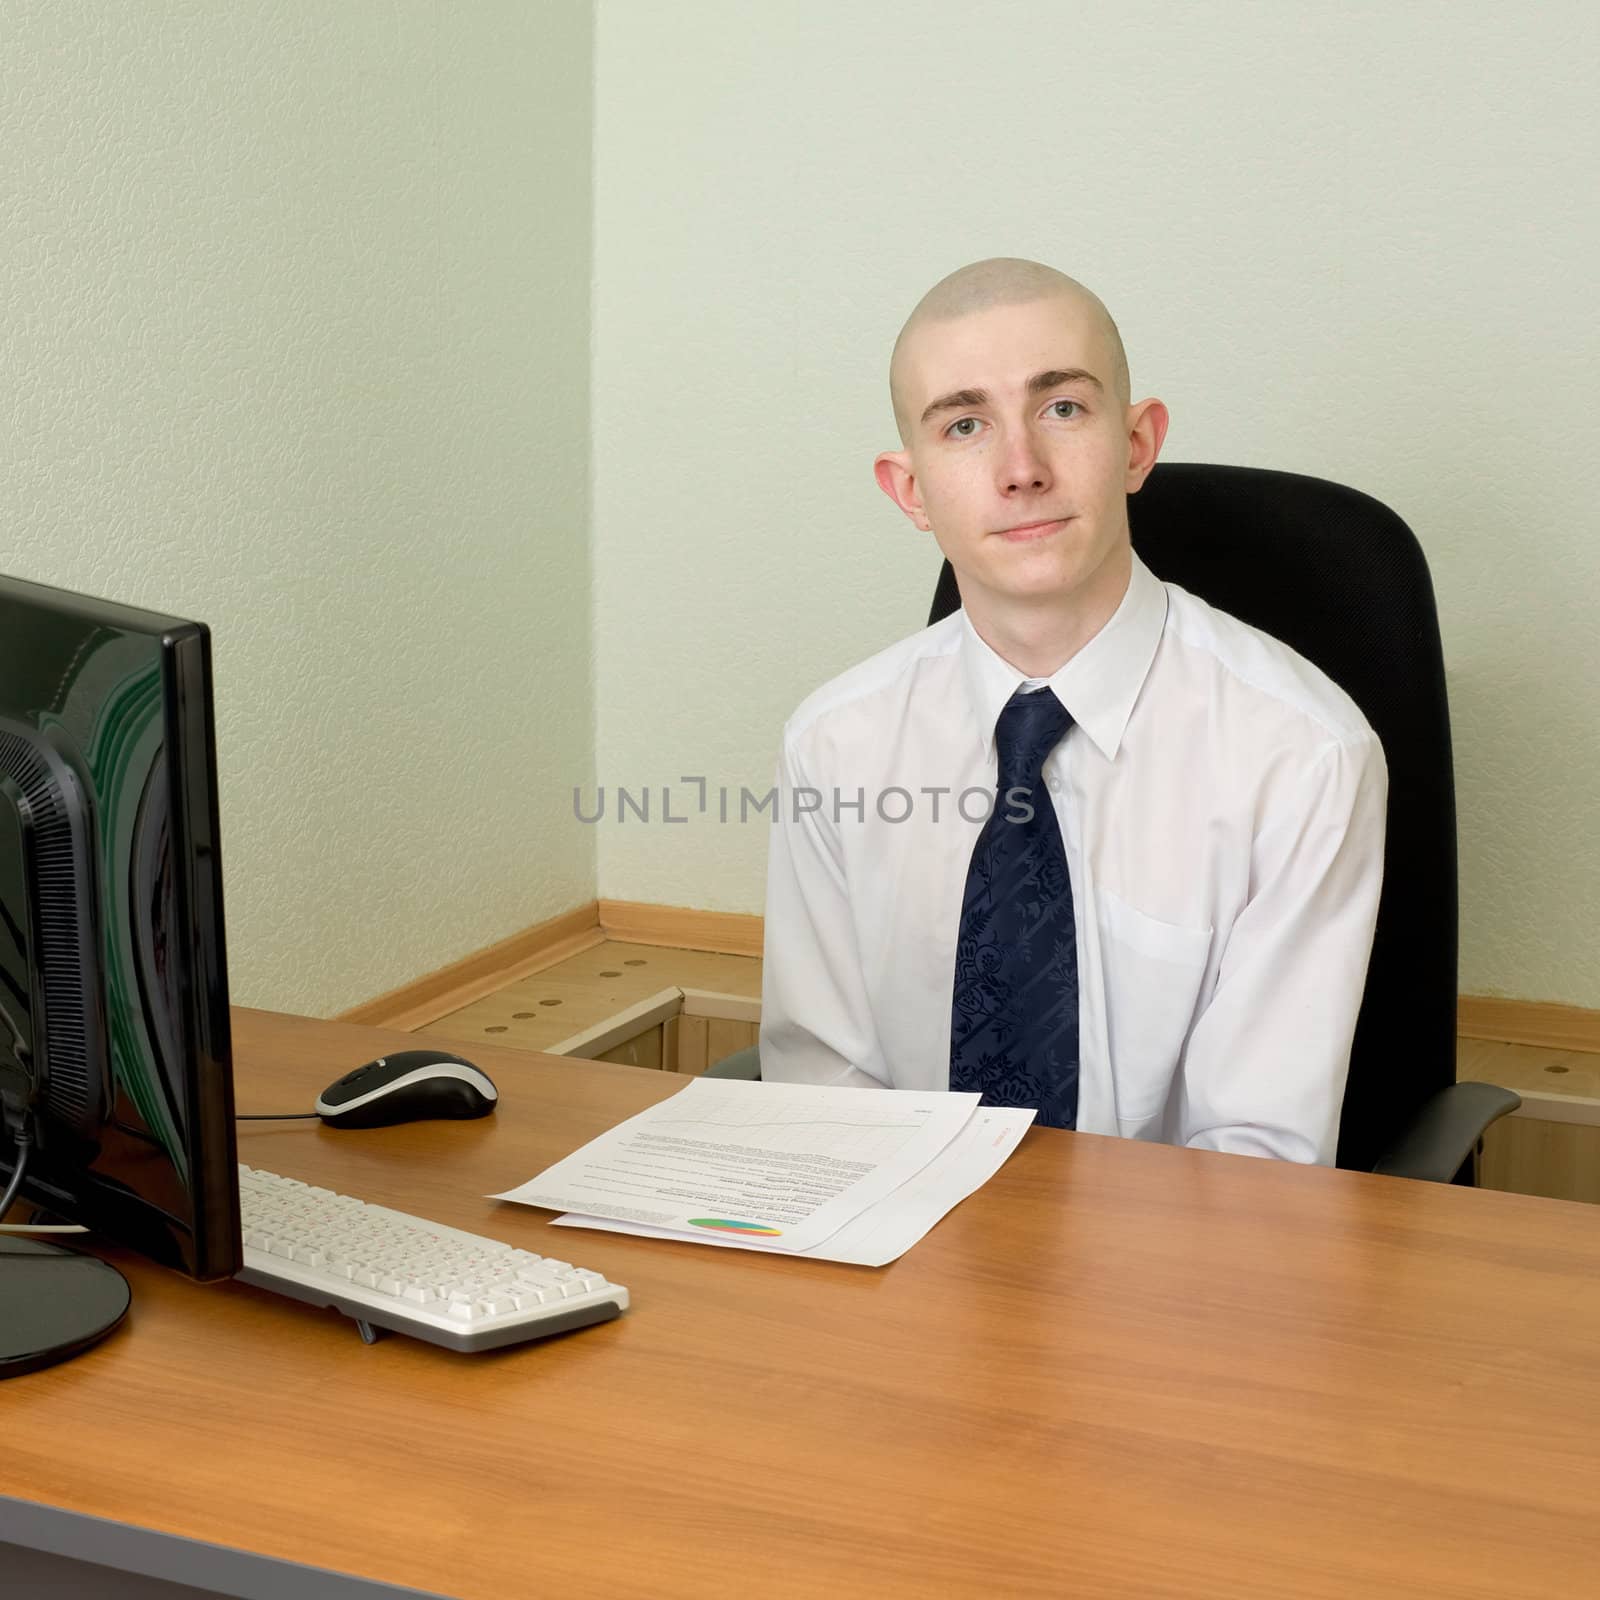 The businessman in a white shirt on a workplace